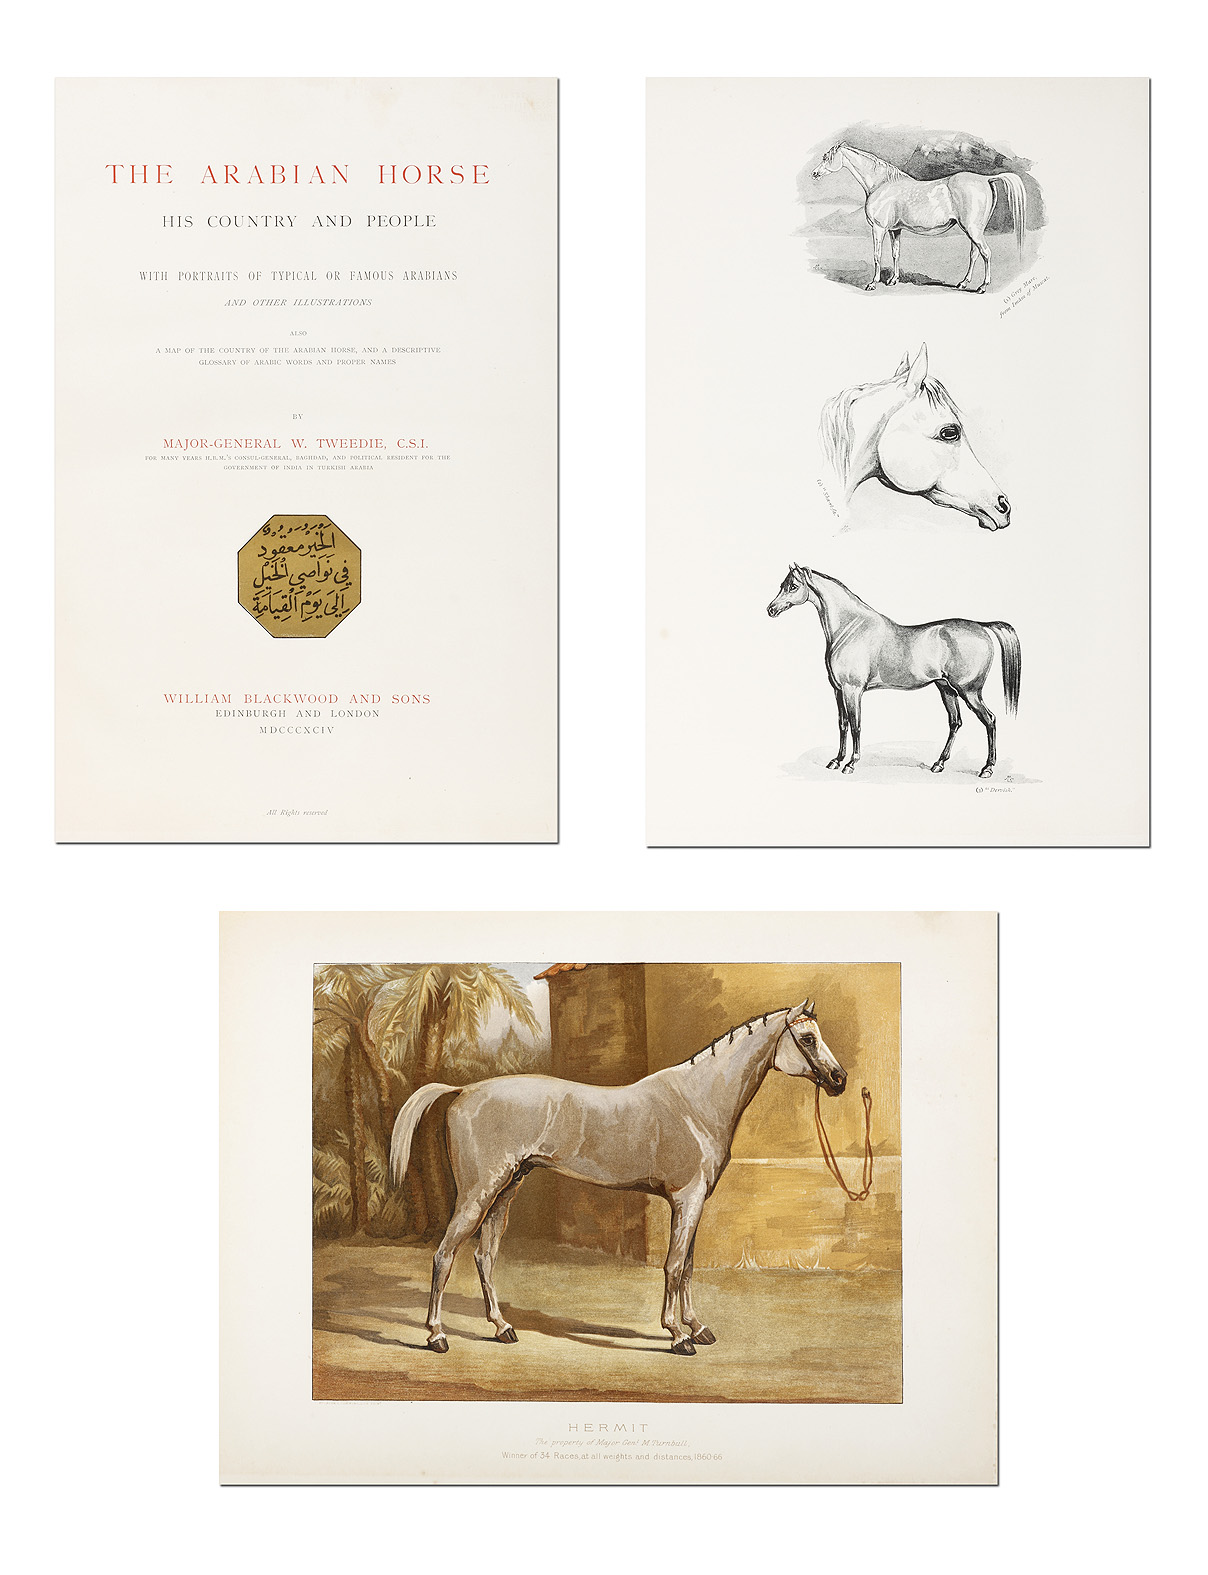 The Arabian Horse His Country and People with Portraits of Typical, or Famous Arabians and other illustrations... - Antique Book from 1894